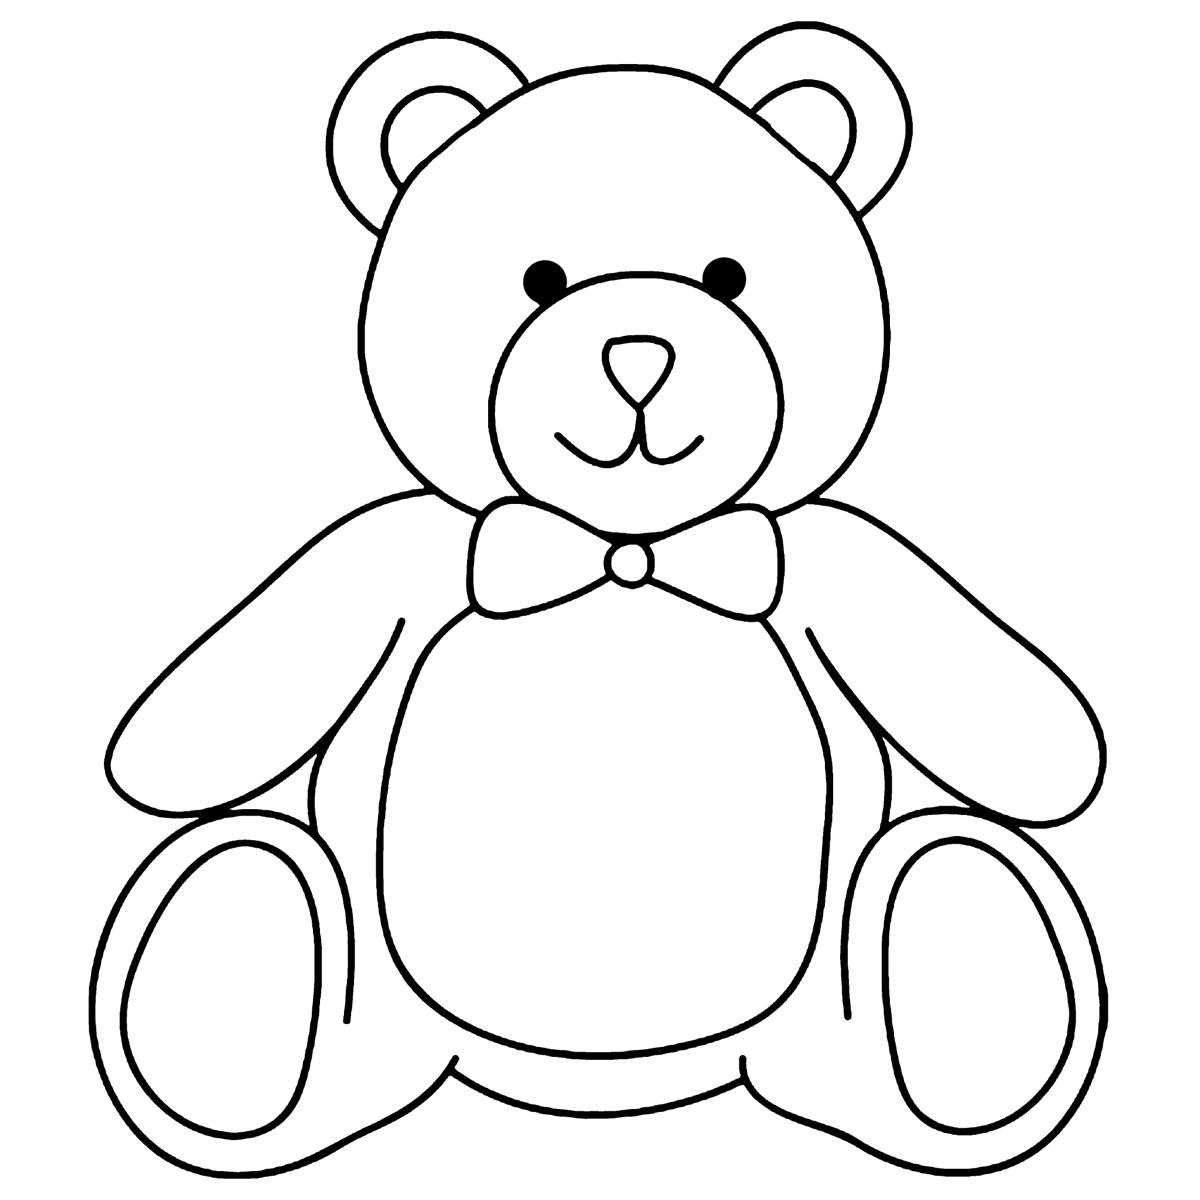 teddy bear puzzle online from photo